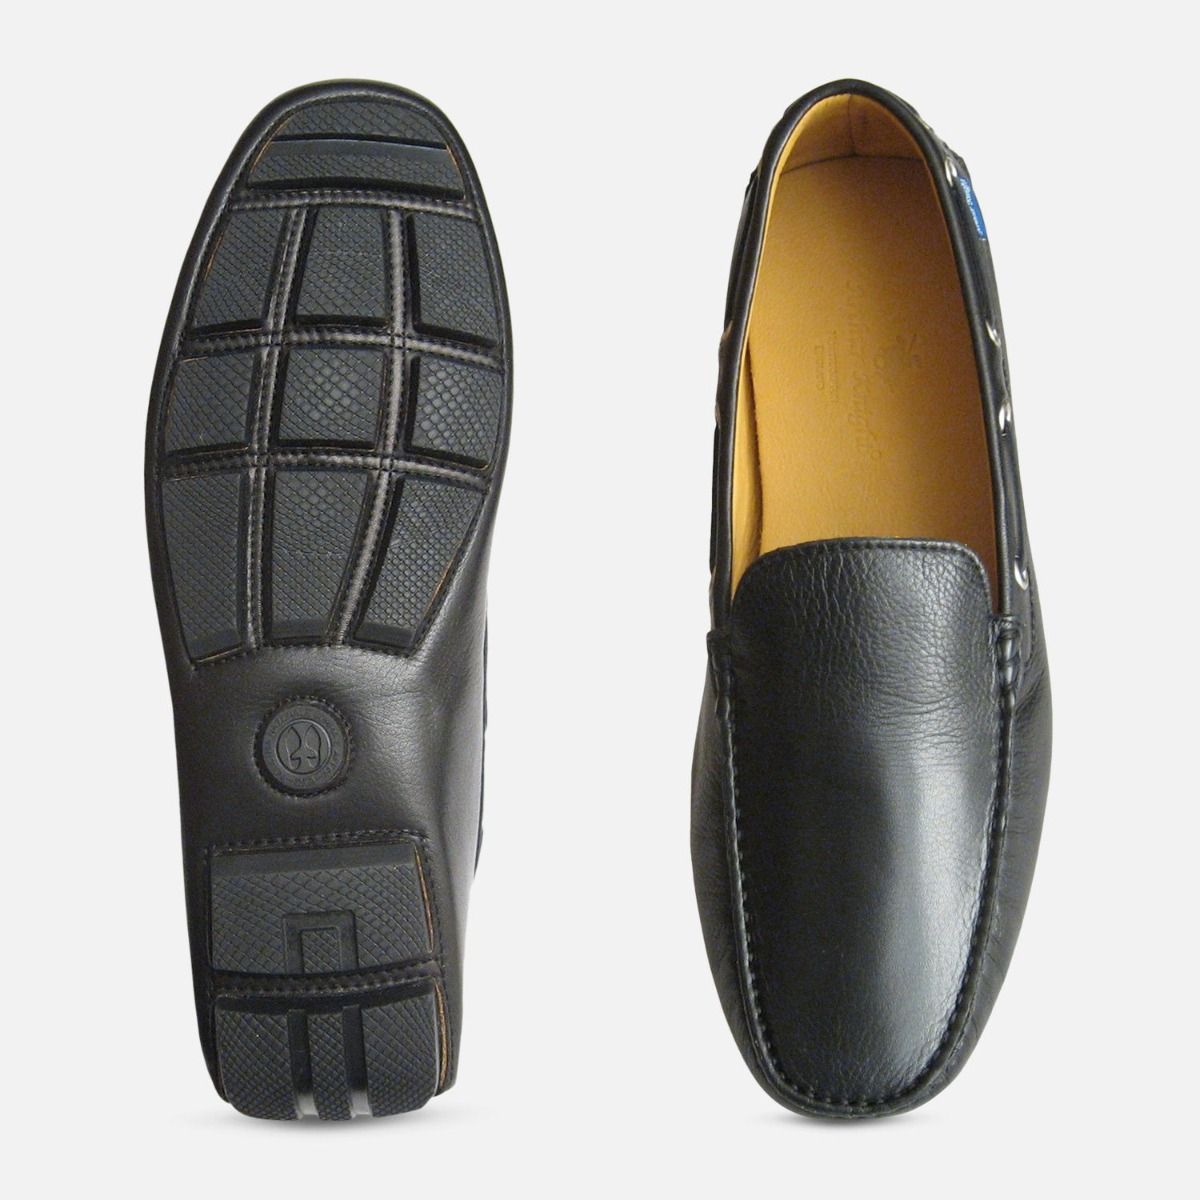 Black Leather Italian Driving Shoe Loafers For Men 2 